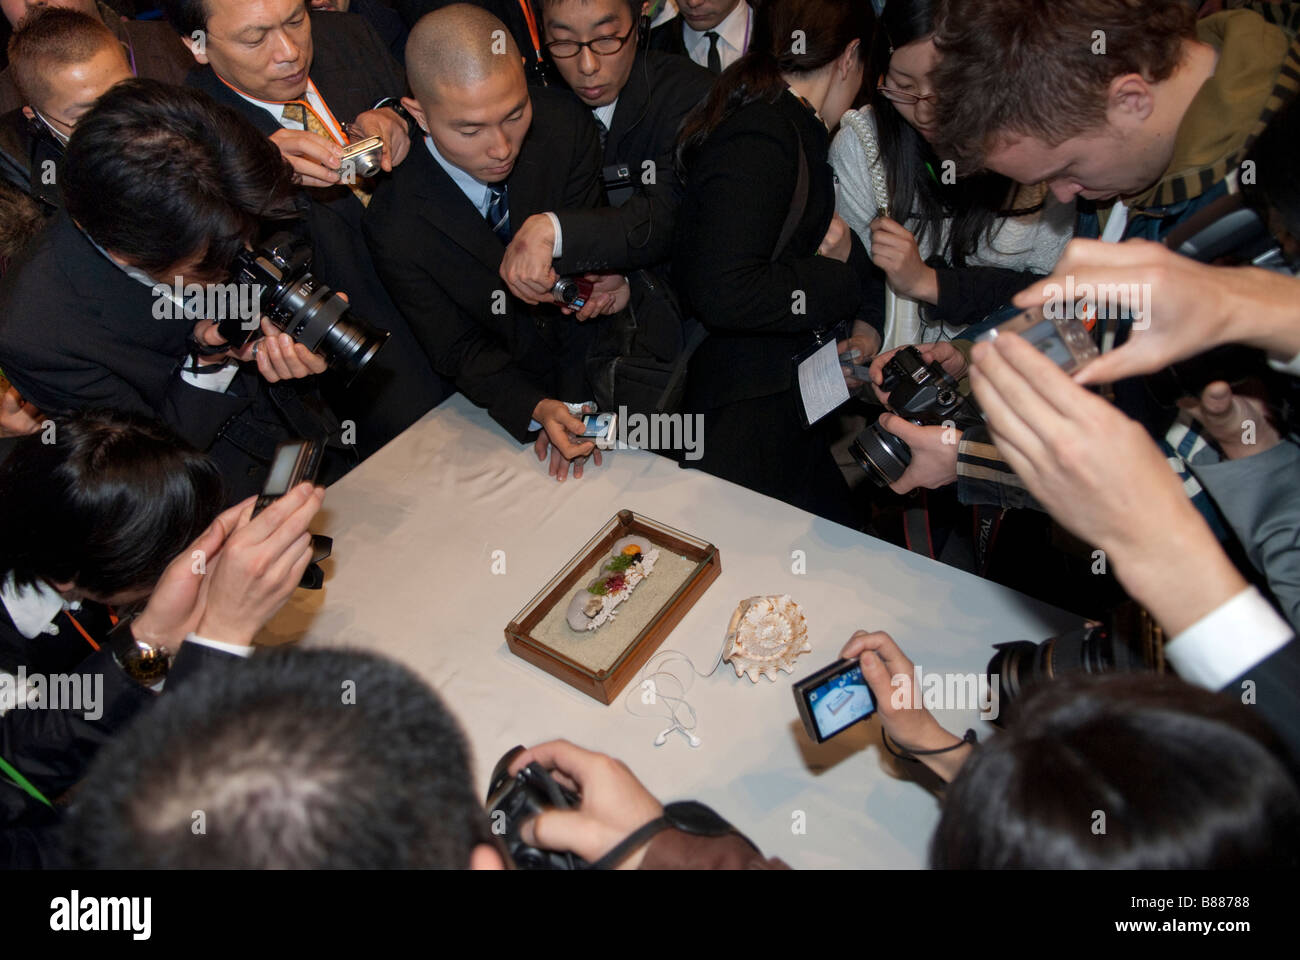 Audience members photograph a creation by chef Heston Blumenthal at Tokyo Taste: The World Summit of Gastronomy 2009. Stock Photo